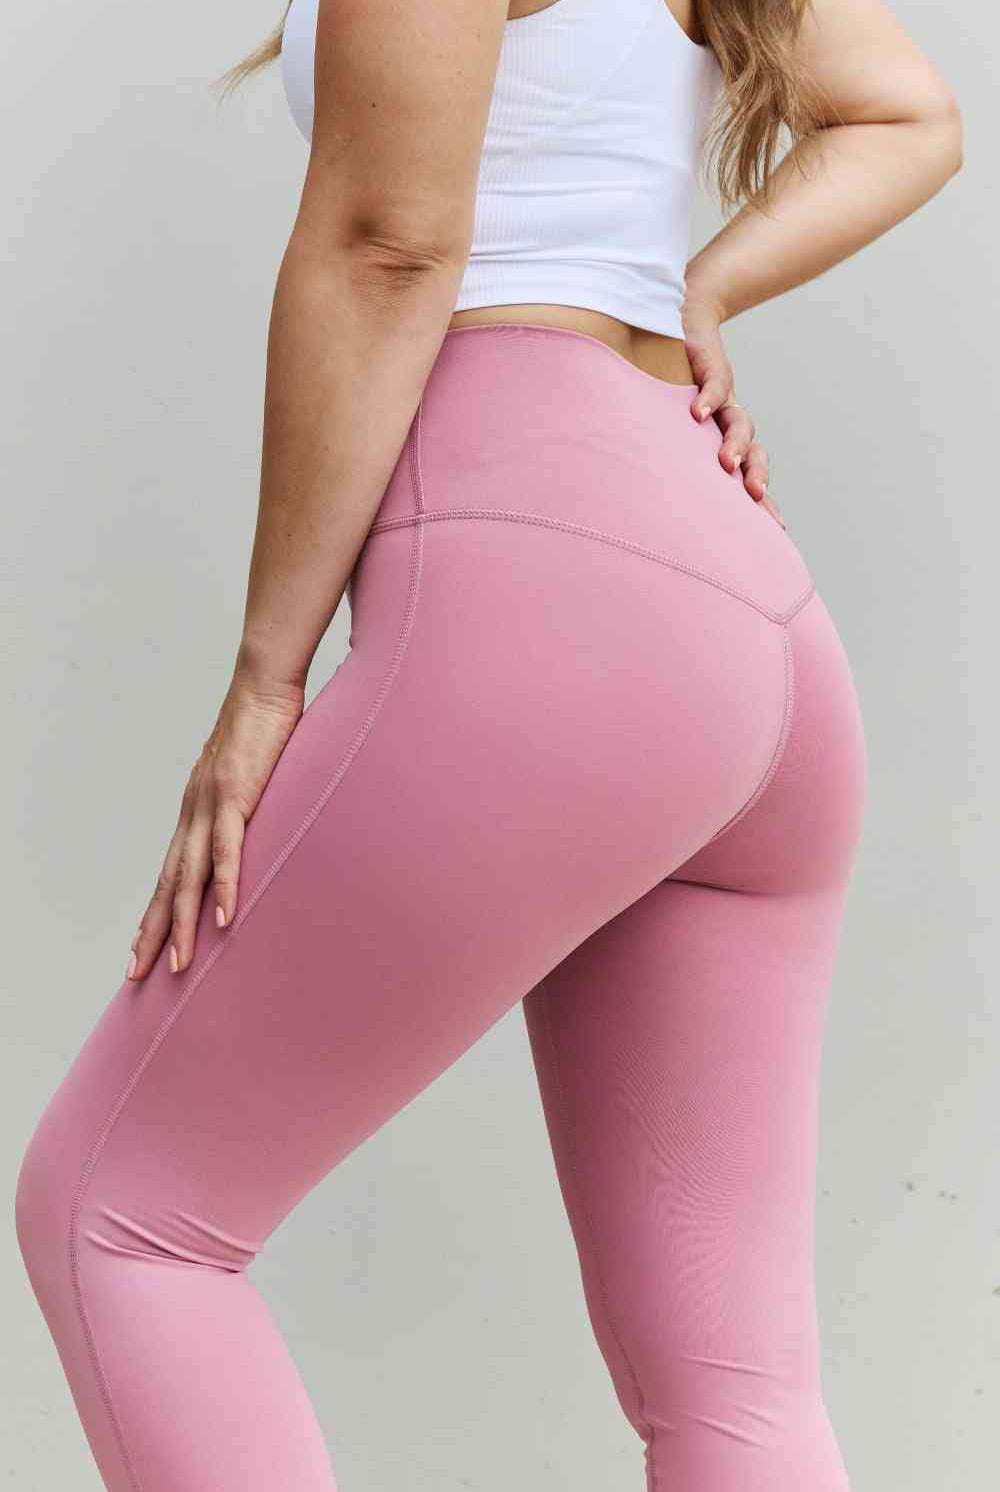 Gray Fit For You Full Size High Waist Active Leggings in Light Rose activewear